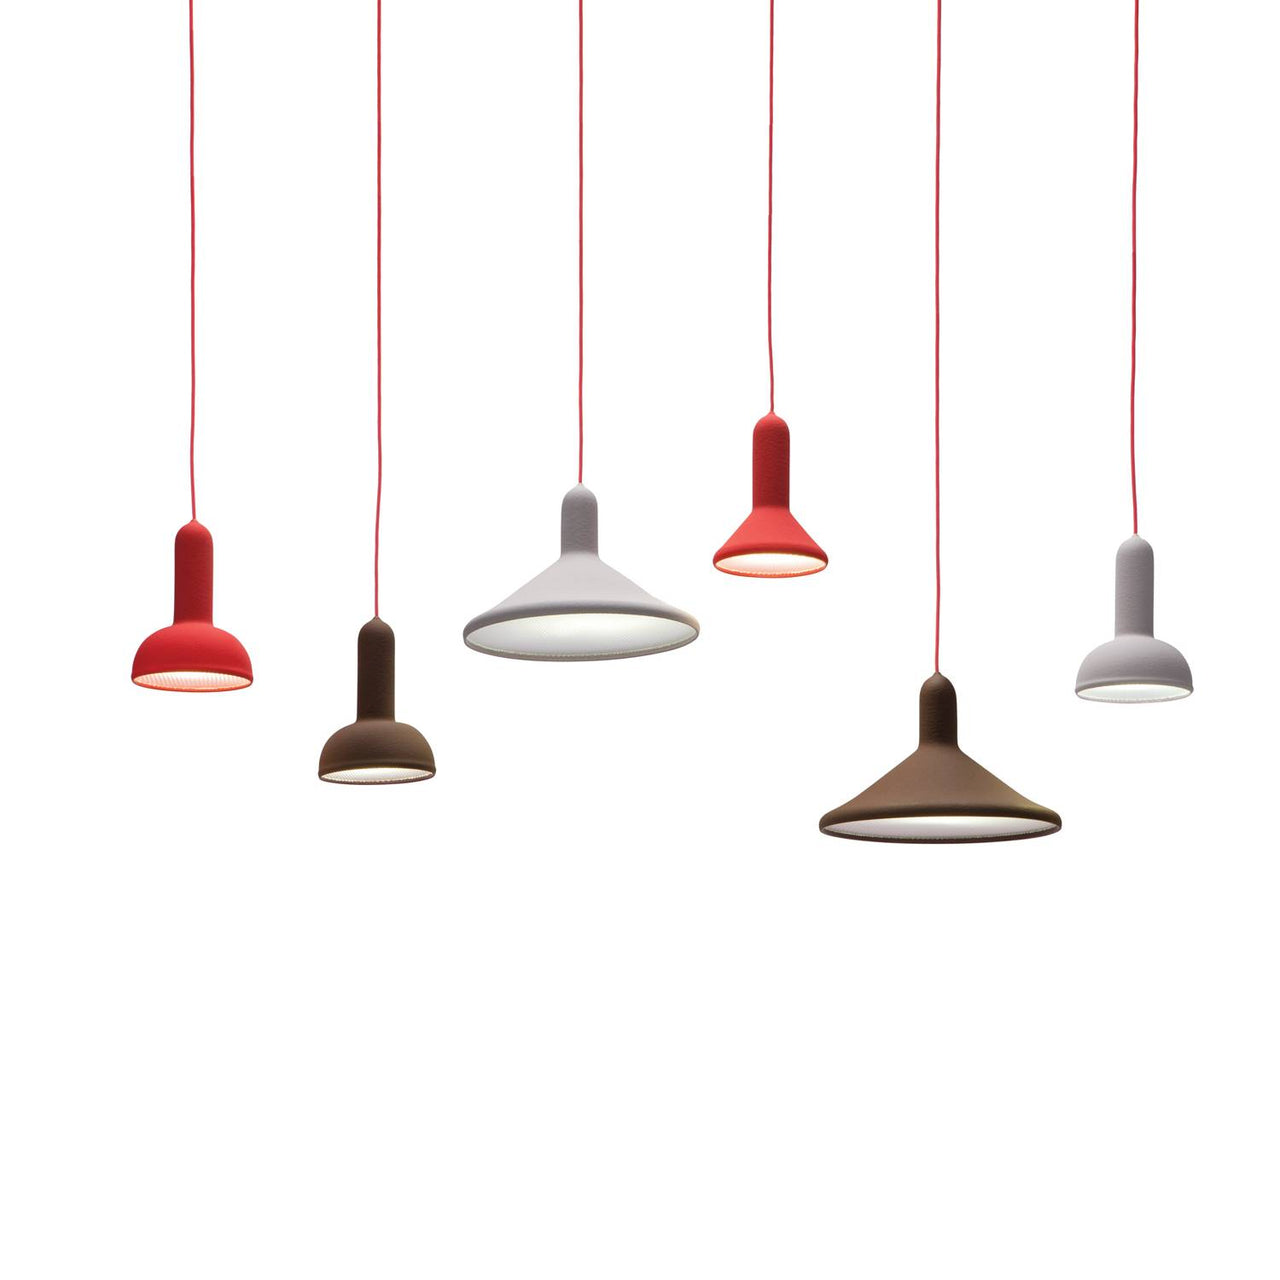 Torch Light Pendant: S2 Round + Red + Red +S3 Cone + Signal Grey + Red + S1 Cone + Red + Red + S2 Round +  Signal Grey + Red